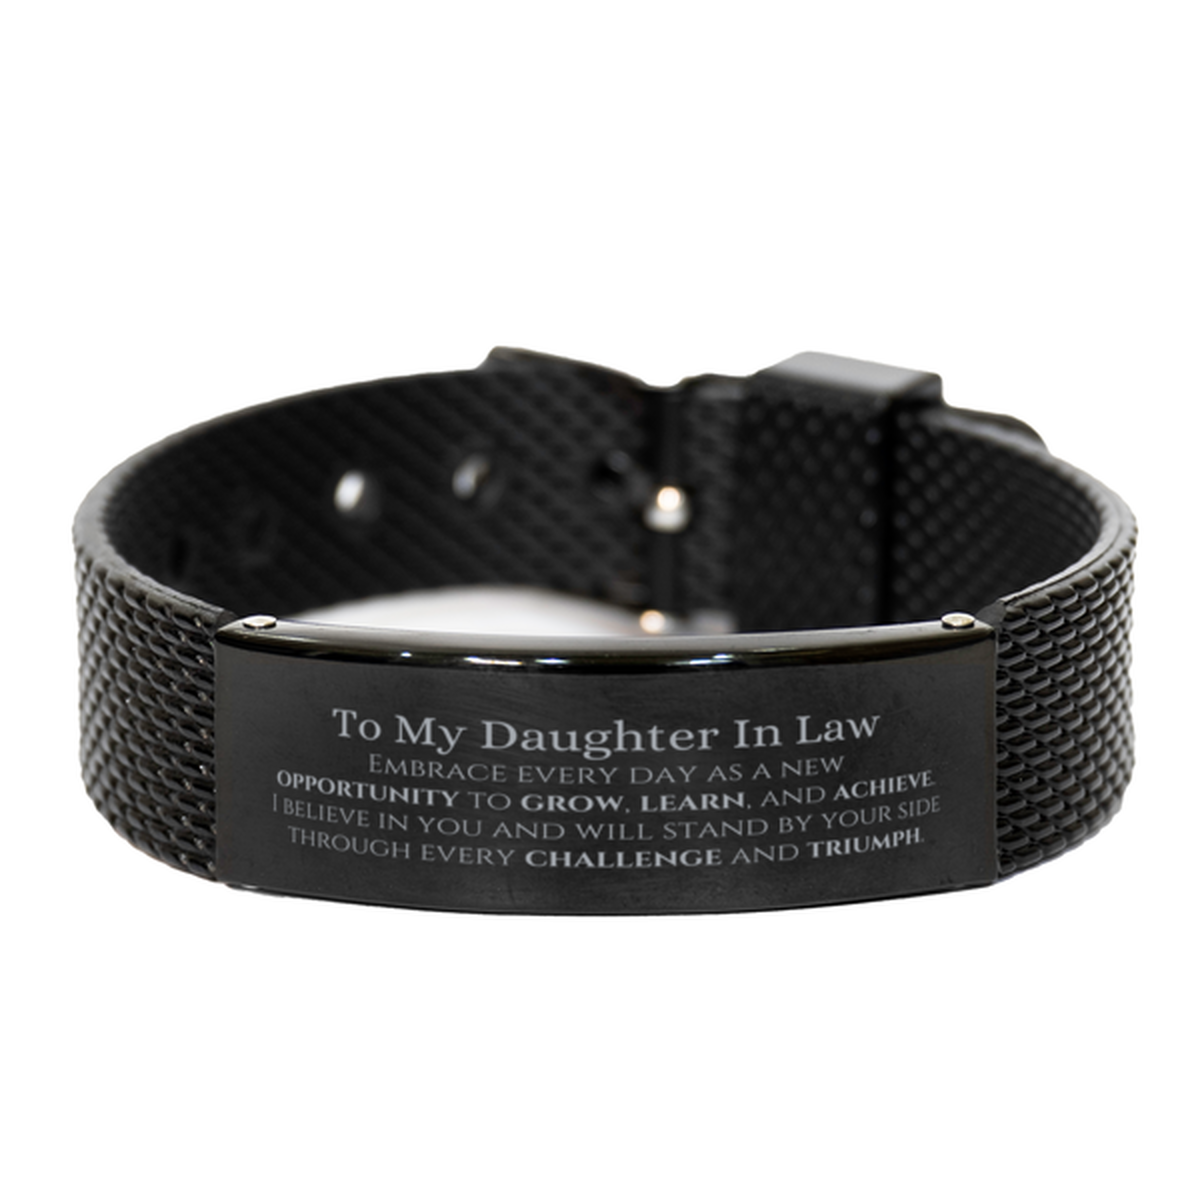 To My Daughter In Law Gifts, I believe in you and will stand by your side, Inspirational Black Shark Mesh Bracelet For Daughter In Law, Birthday Christmas Motivational Daughter In Law Gifts